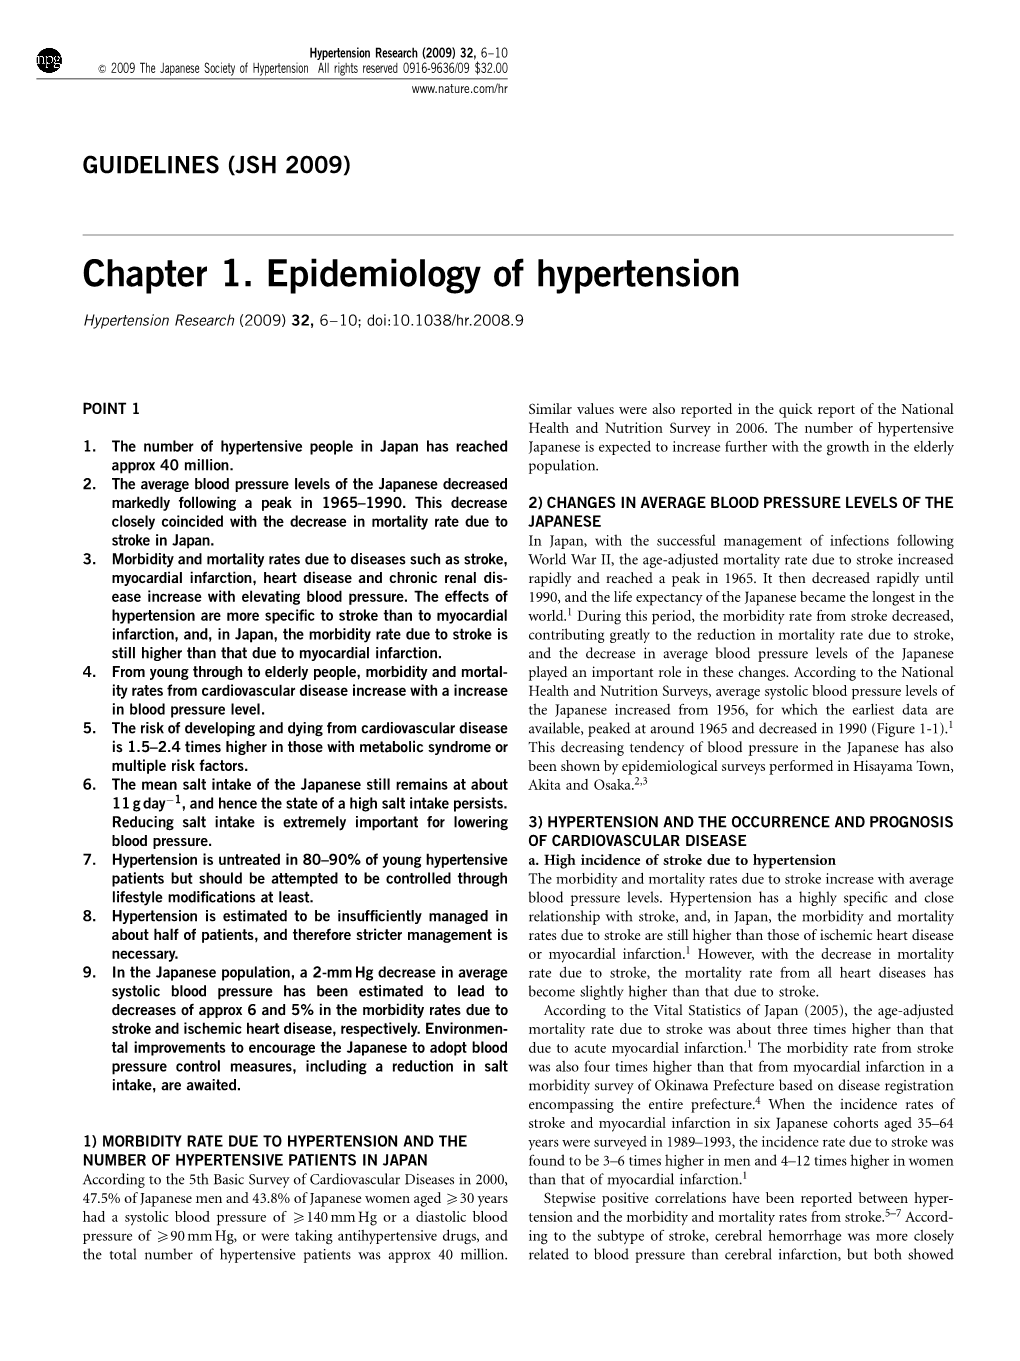 Chapter 1. Epidemiology of Hypertension